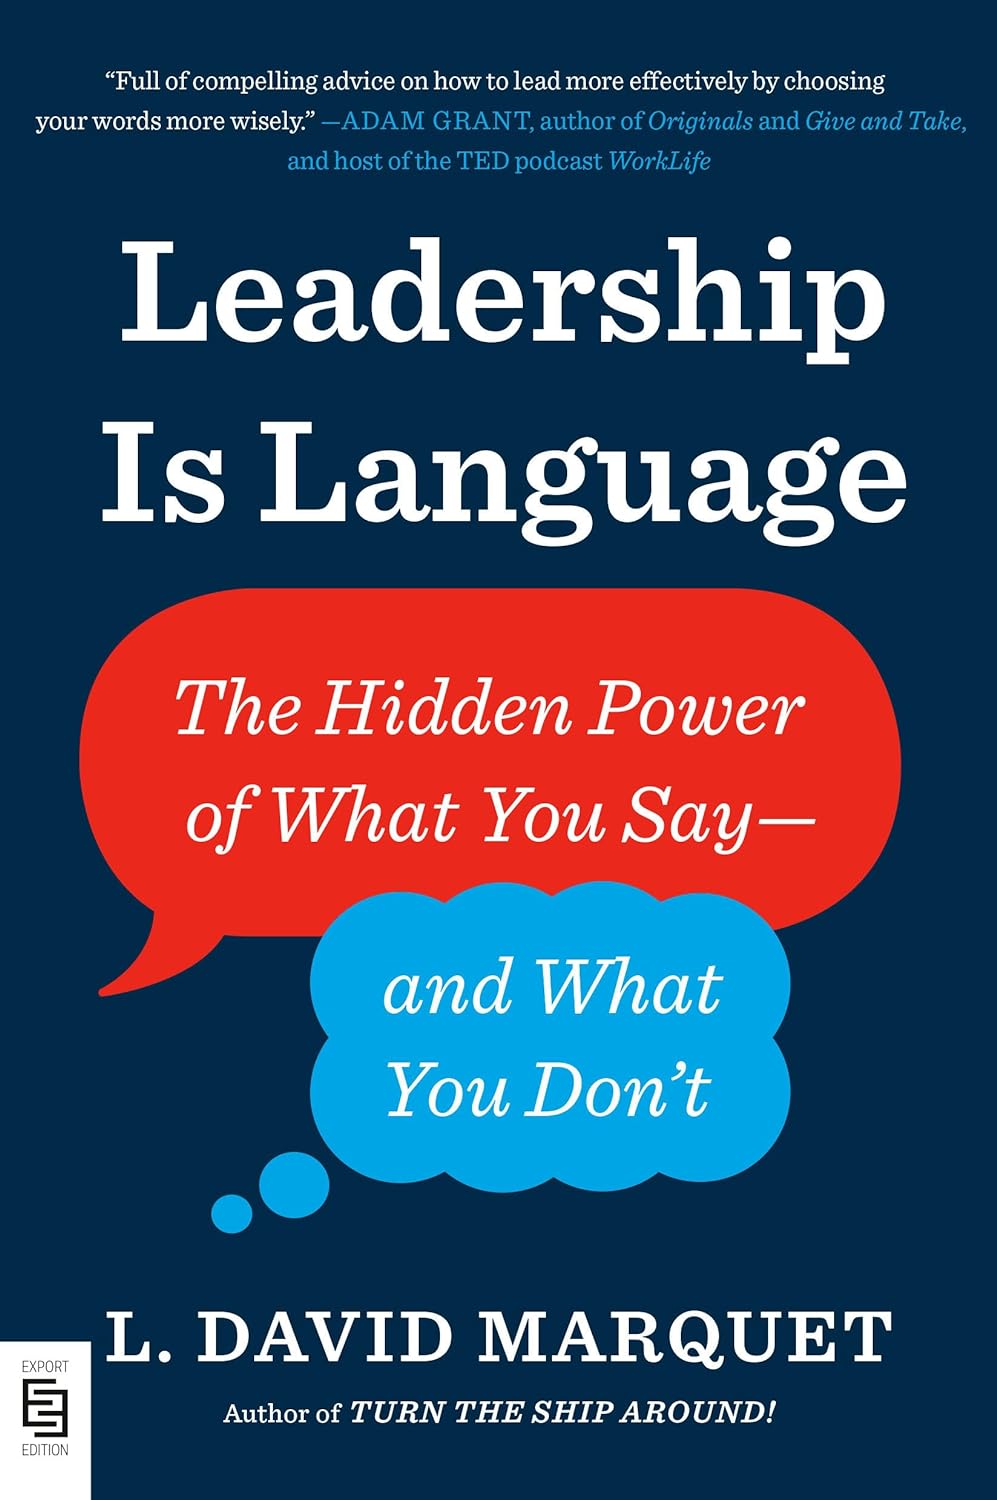 Leadership Is Language: The Hidden Power of What You Say--and What You Don't Paperback – January 1, 2020